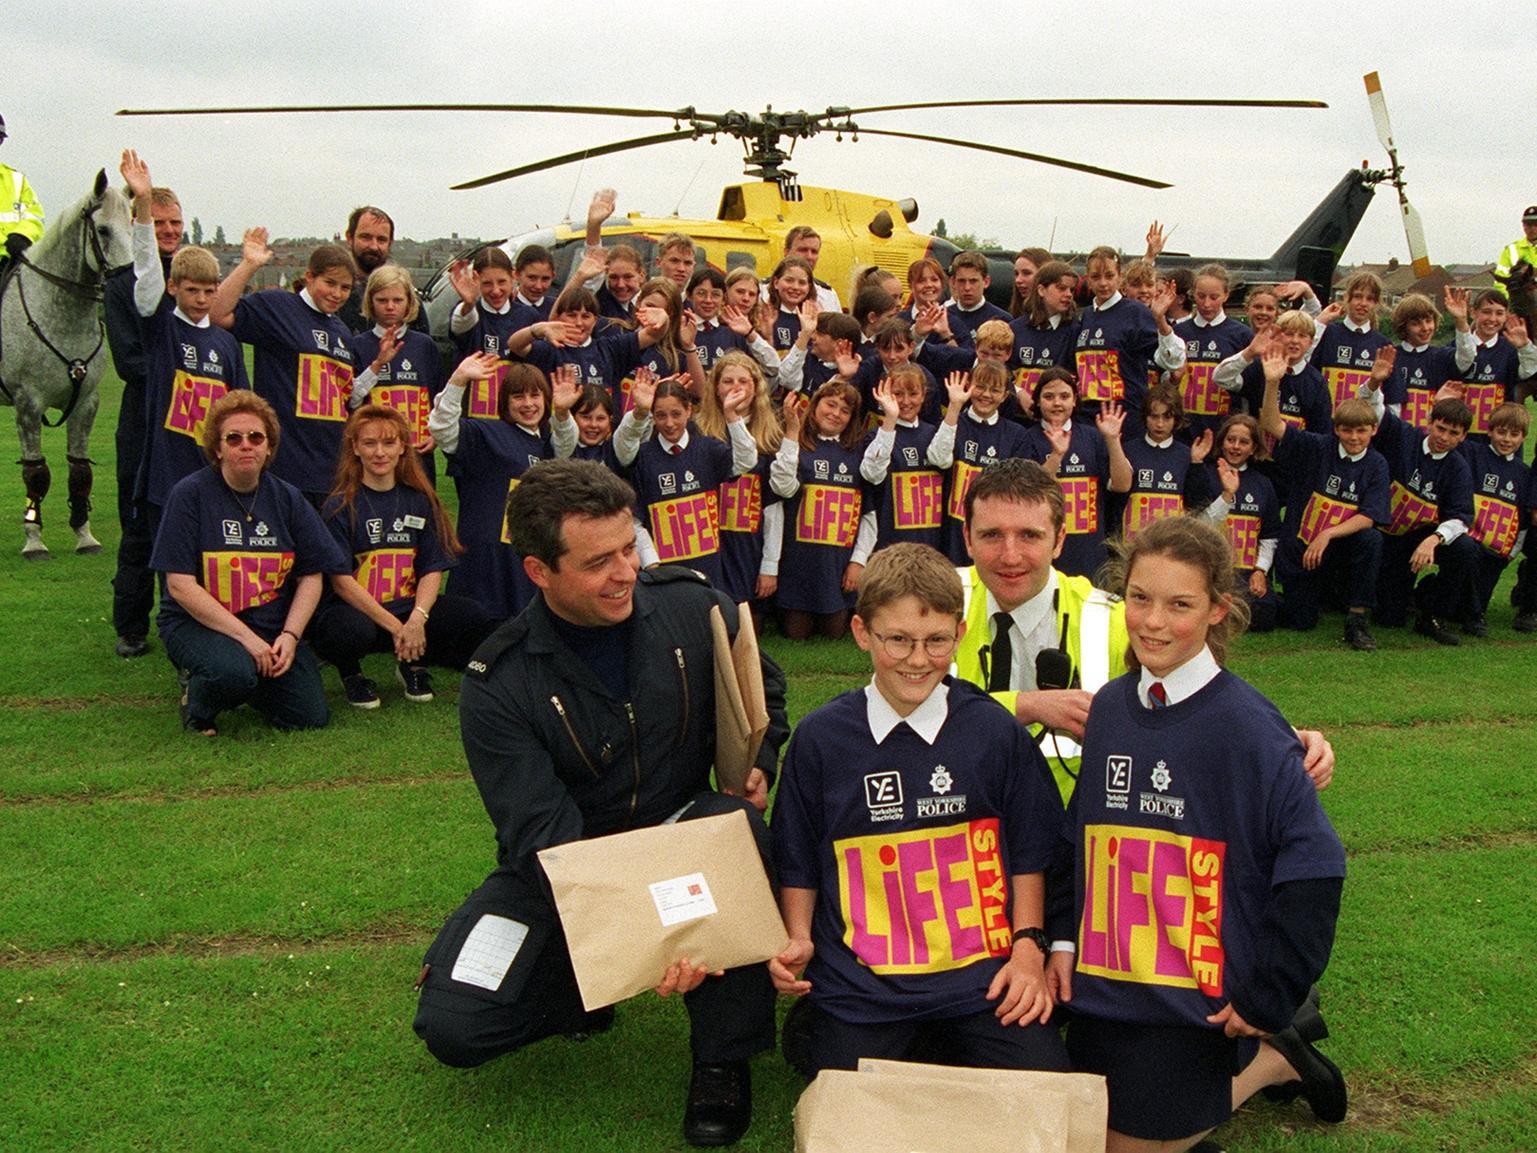 Air drop for pupils of Garforth Community College. 60 pupils were taking part in the Lifestyle 98 project, a scheme set up by the police to give youngsters a focus on their communities during school holidays.